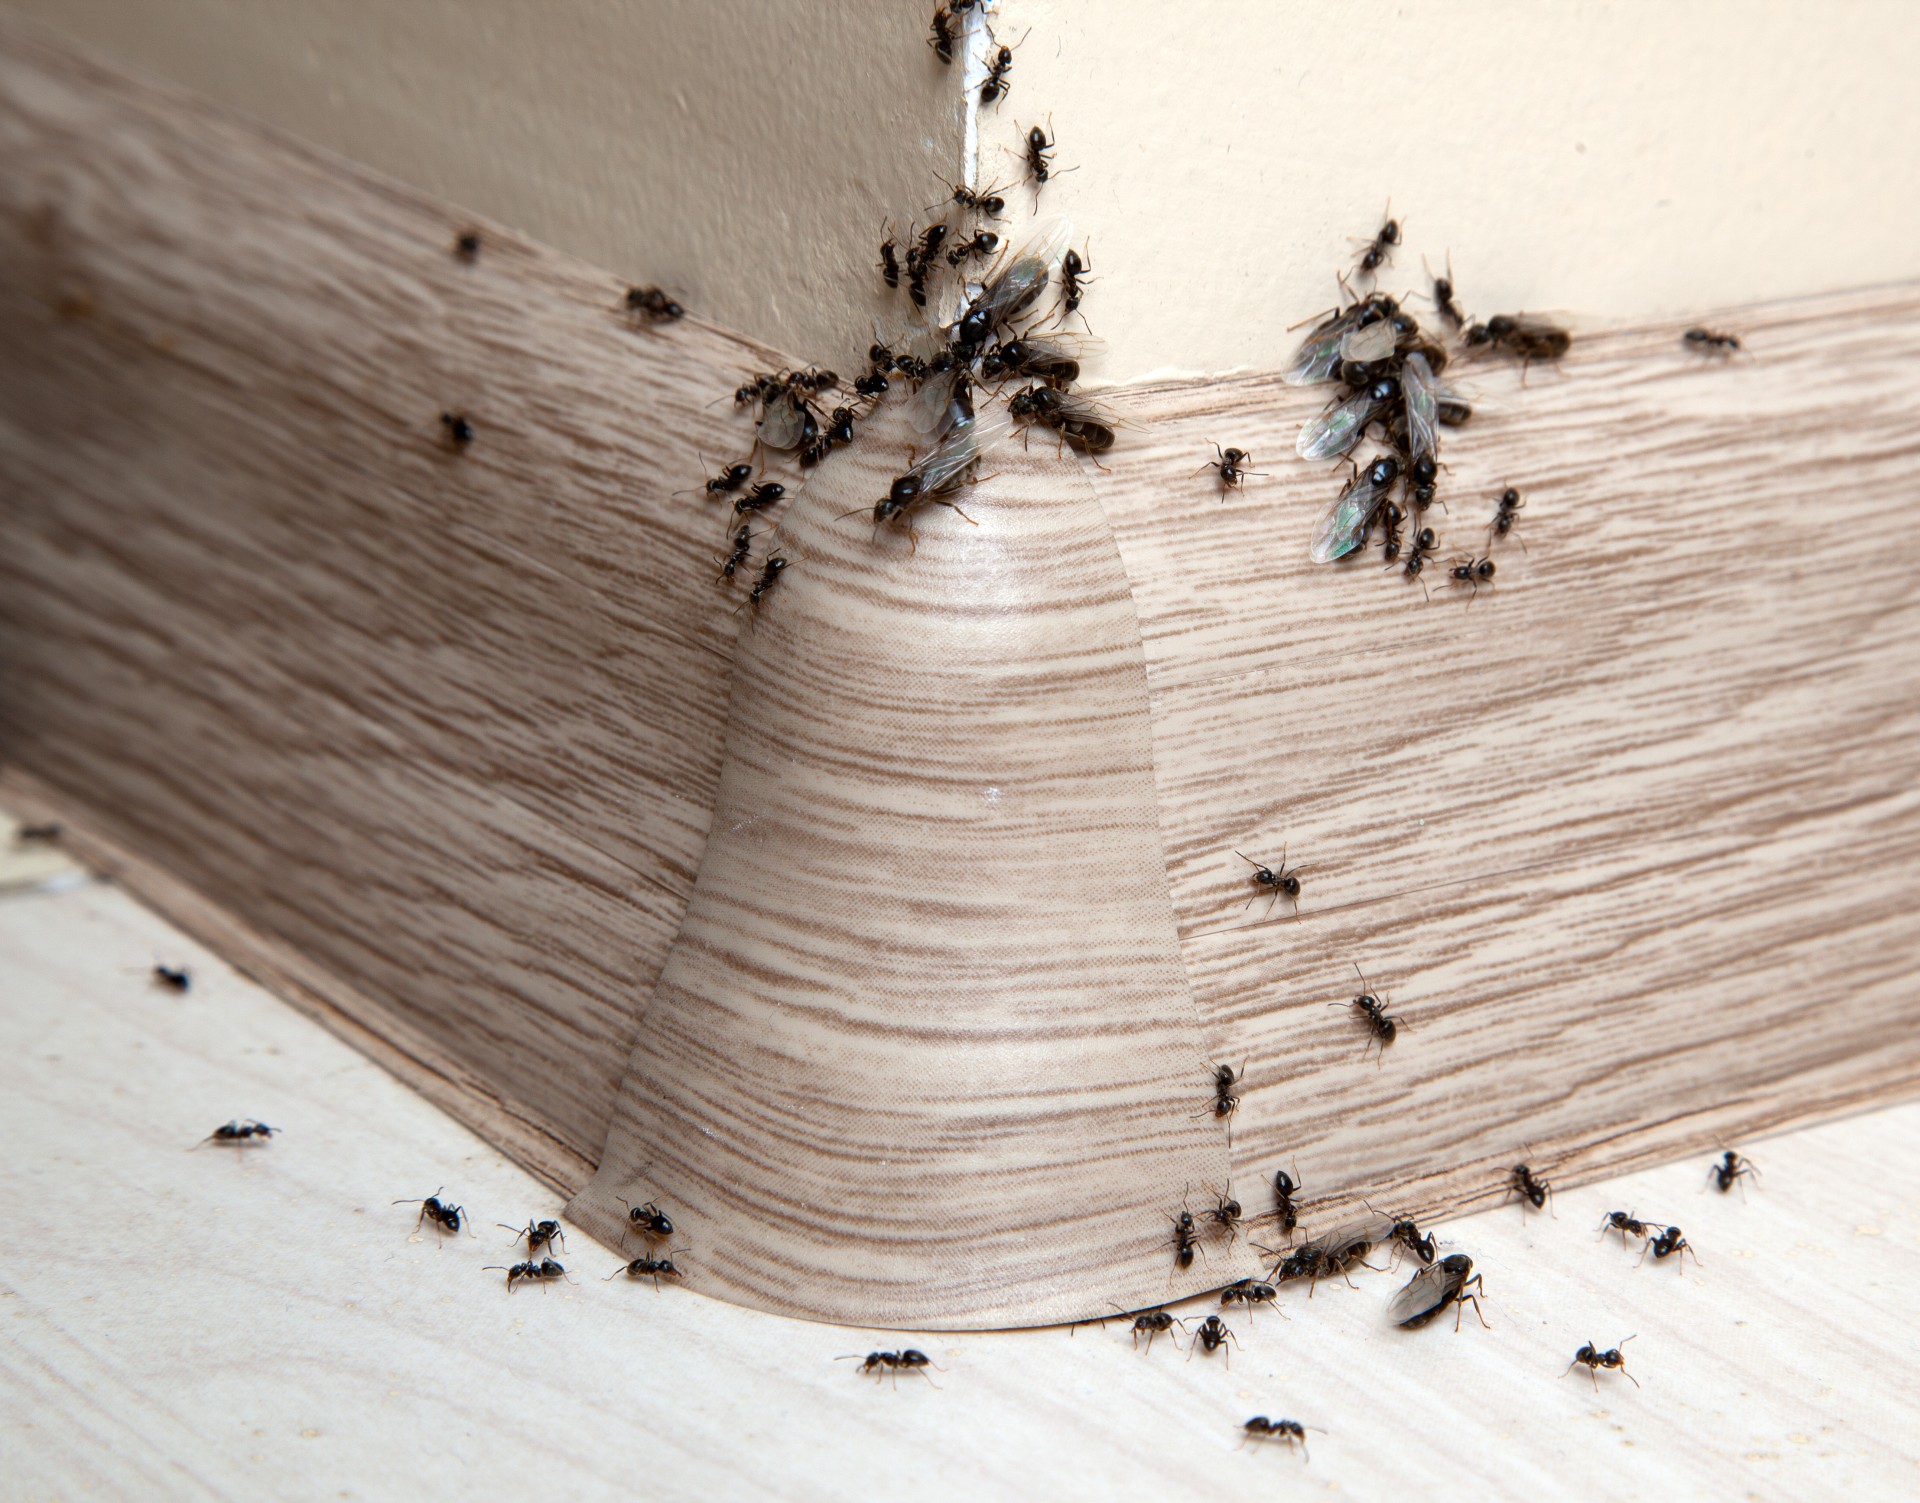 Ant Infestation, Pest Control in Kingston upon Thames, KT1. Call Now 020 8166 9746